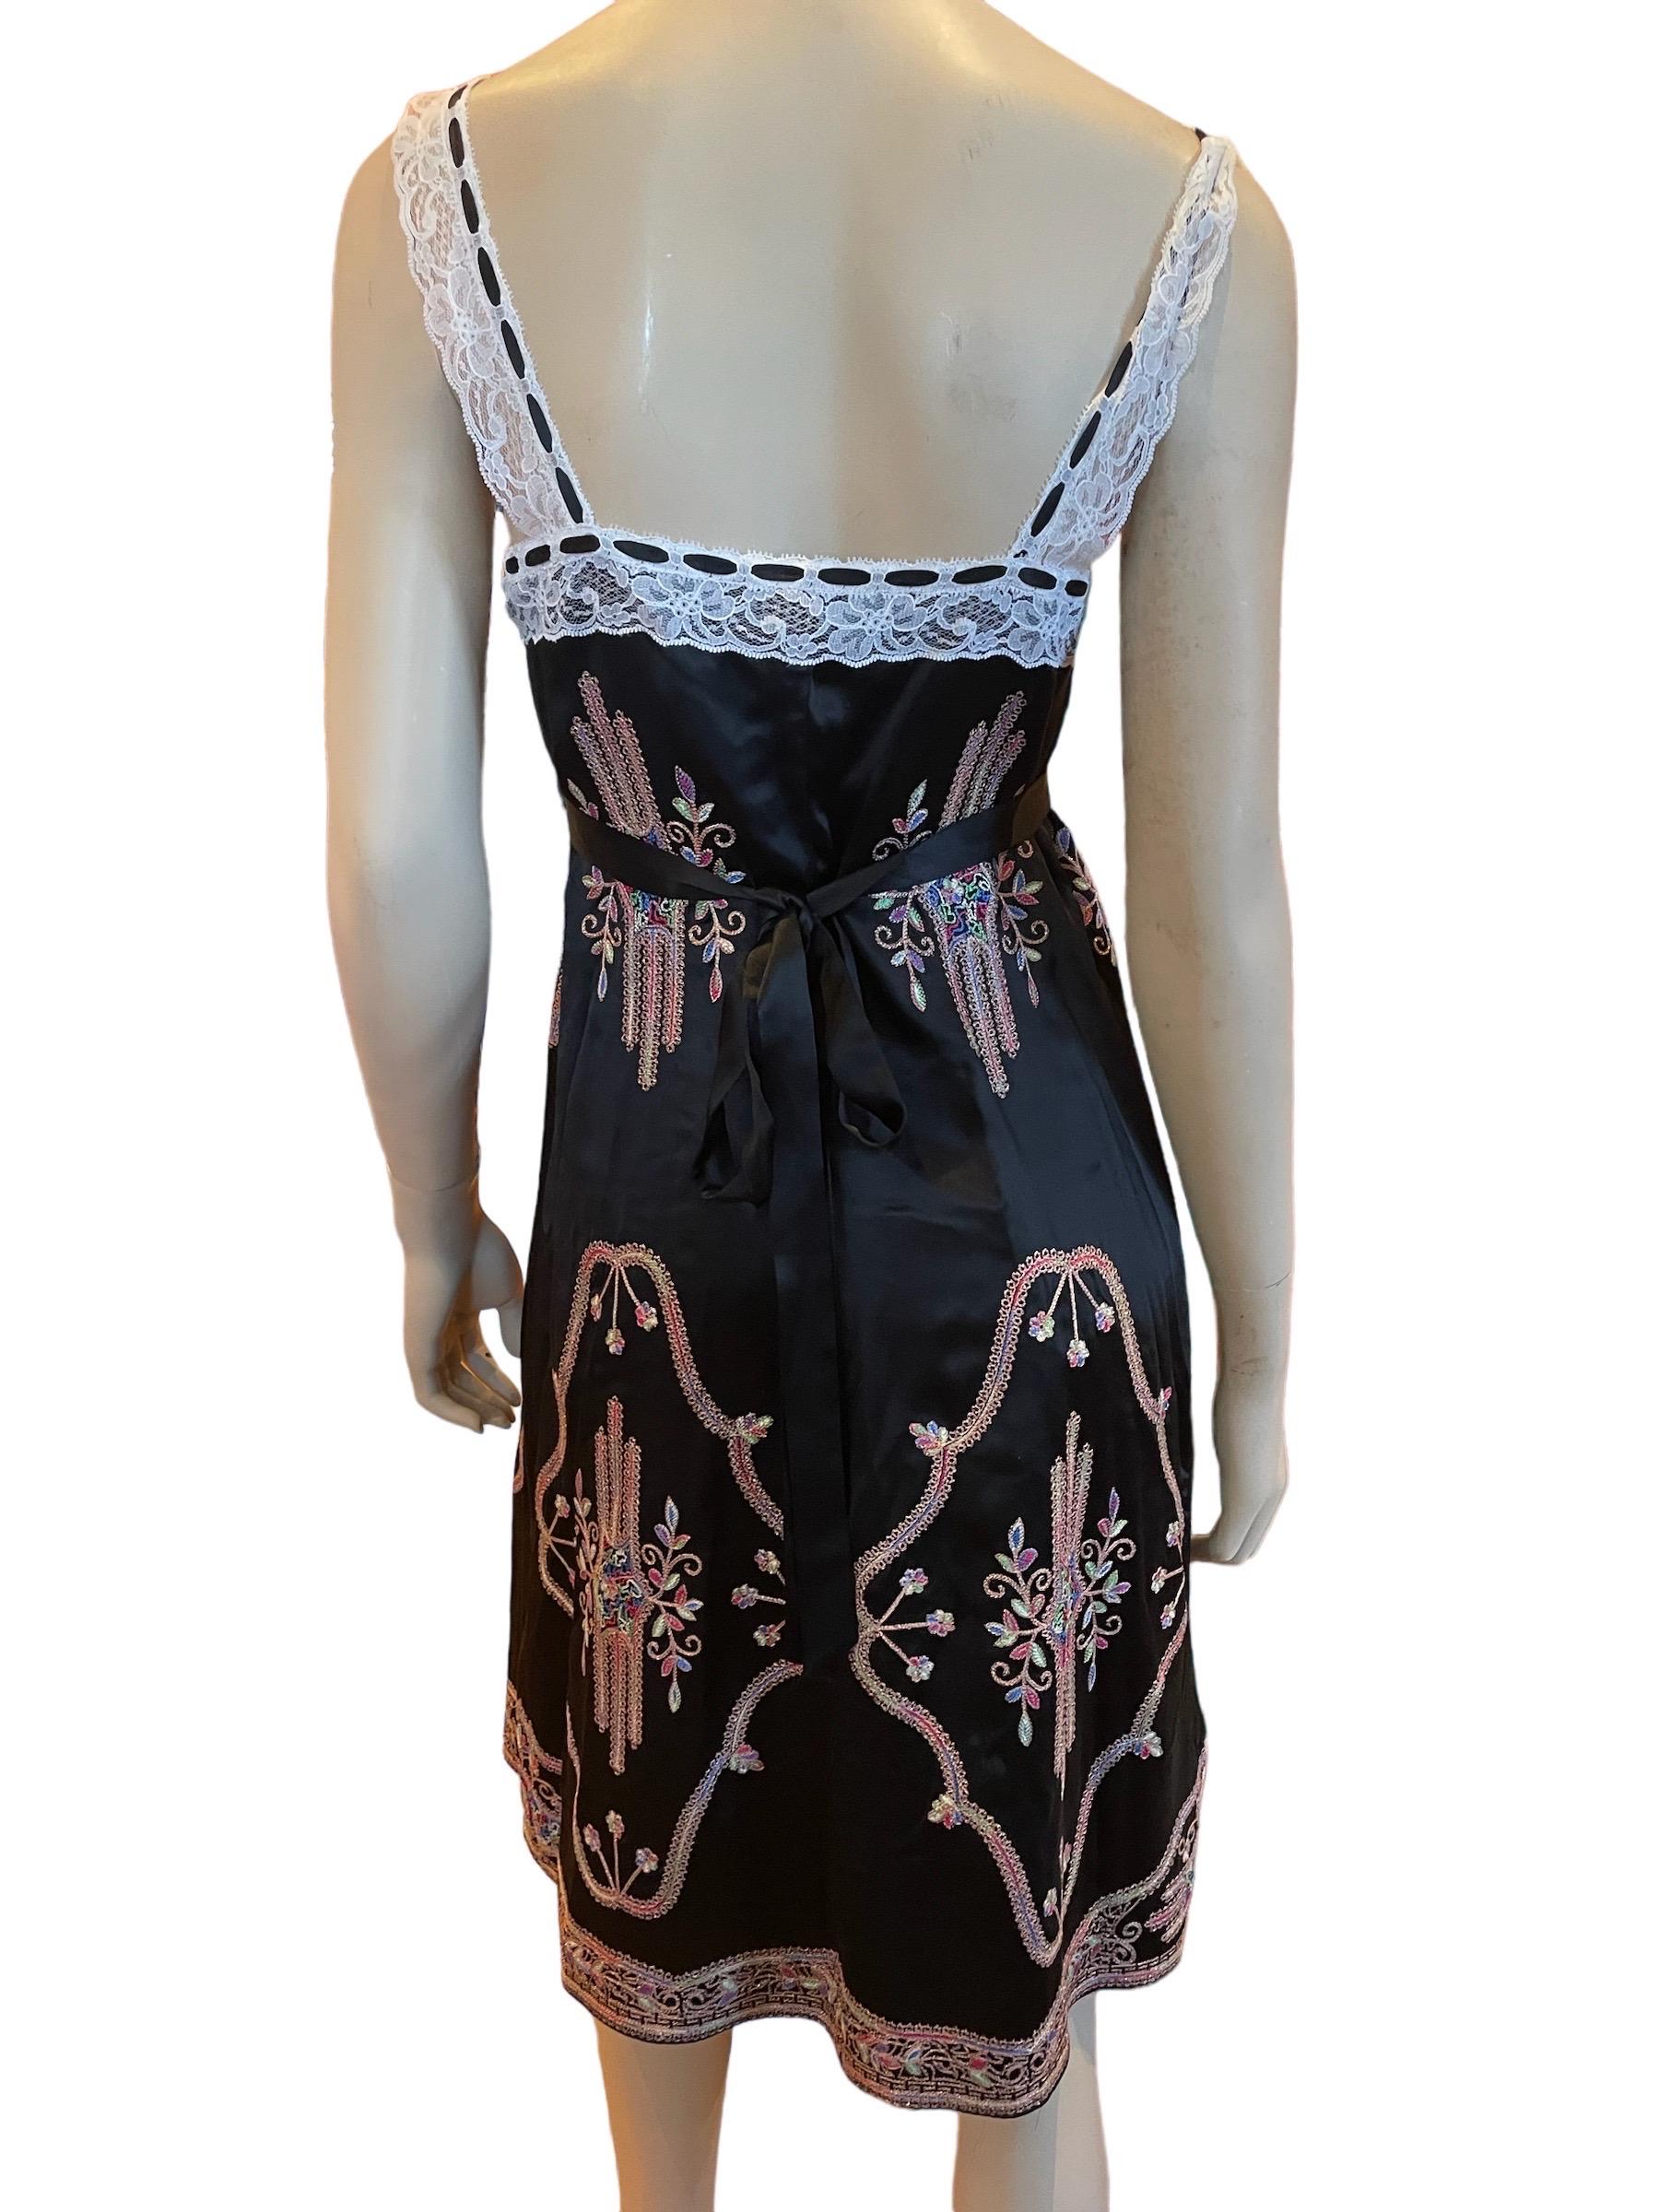 Y2K Black Betsey Johnson Baby Doll Slip Dress, Embroidered with Lace Trim Bodice For Sale 2